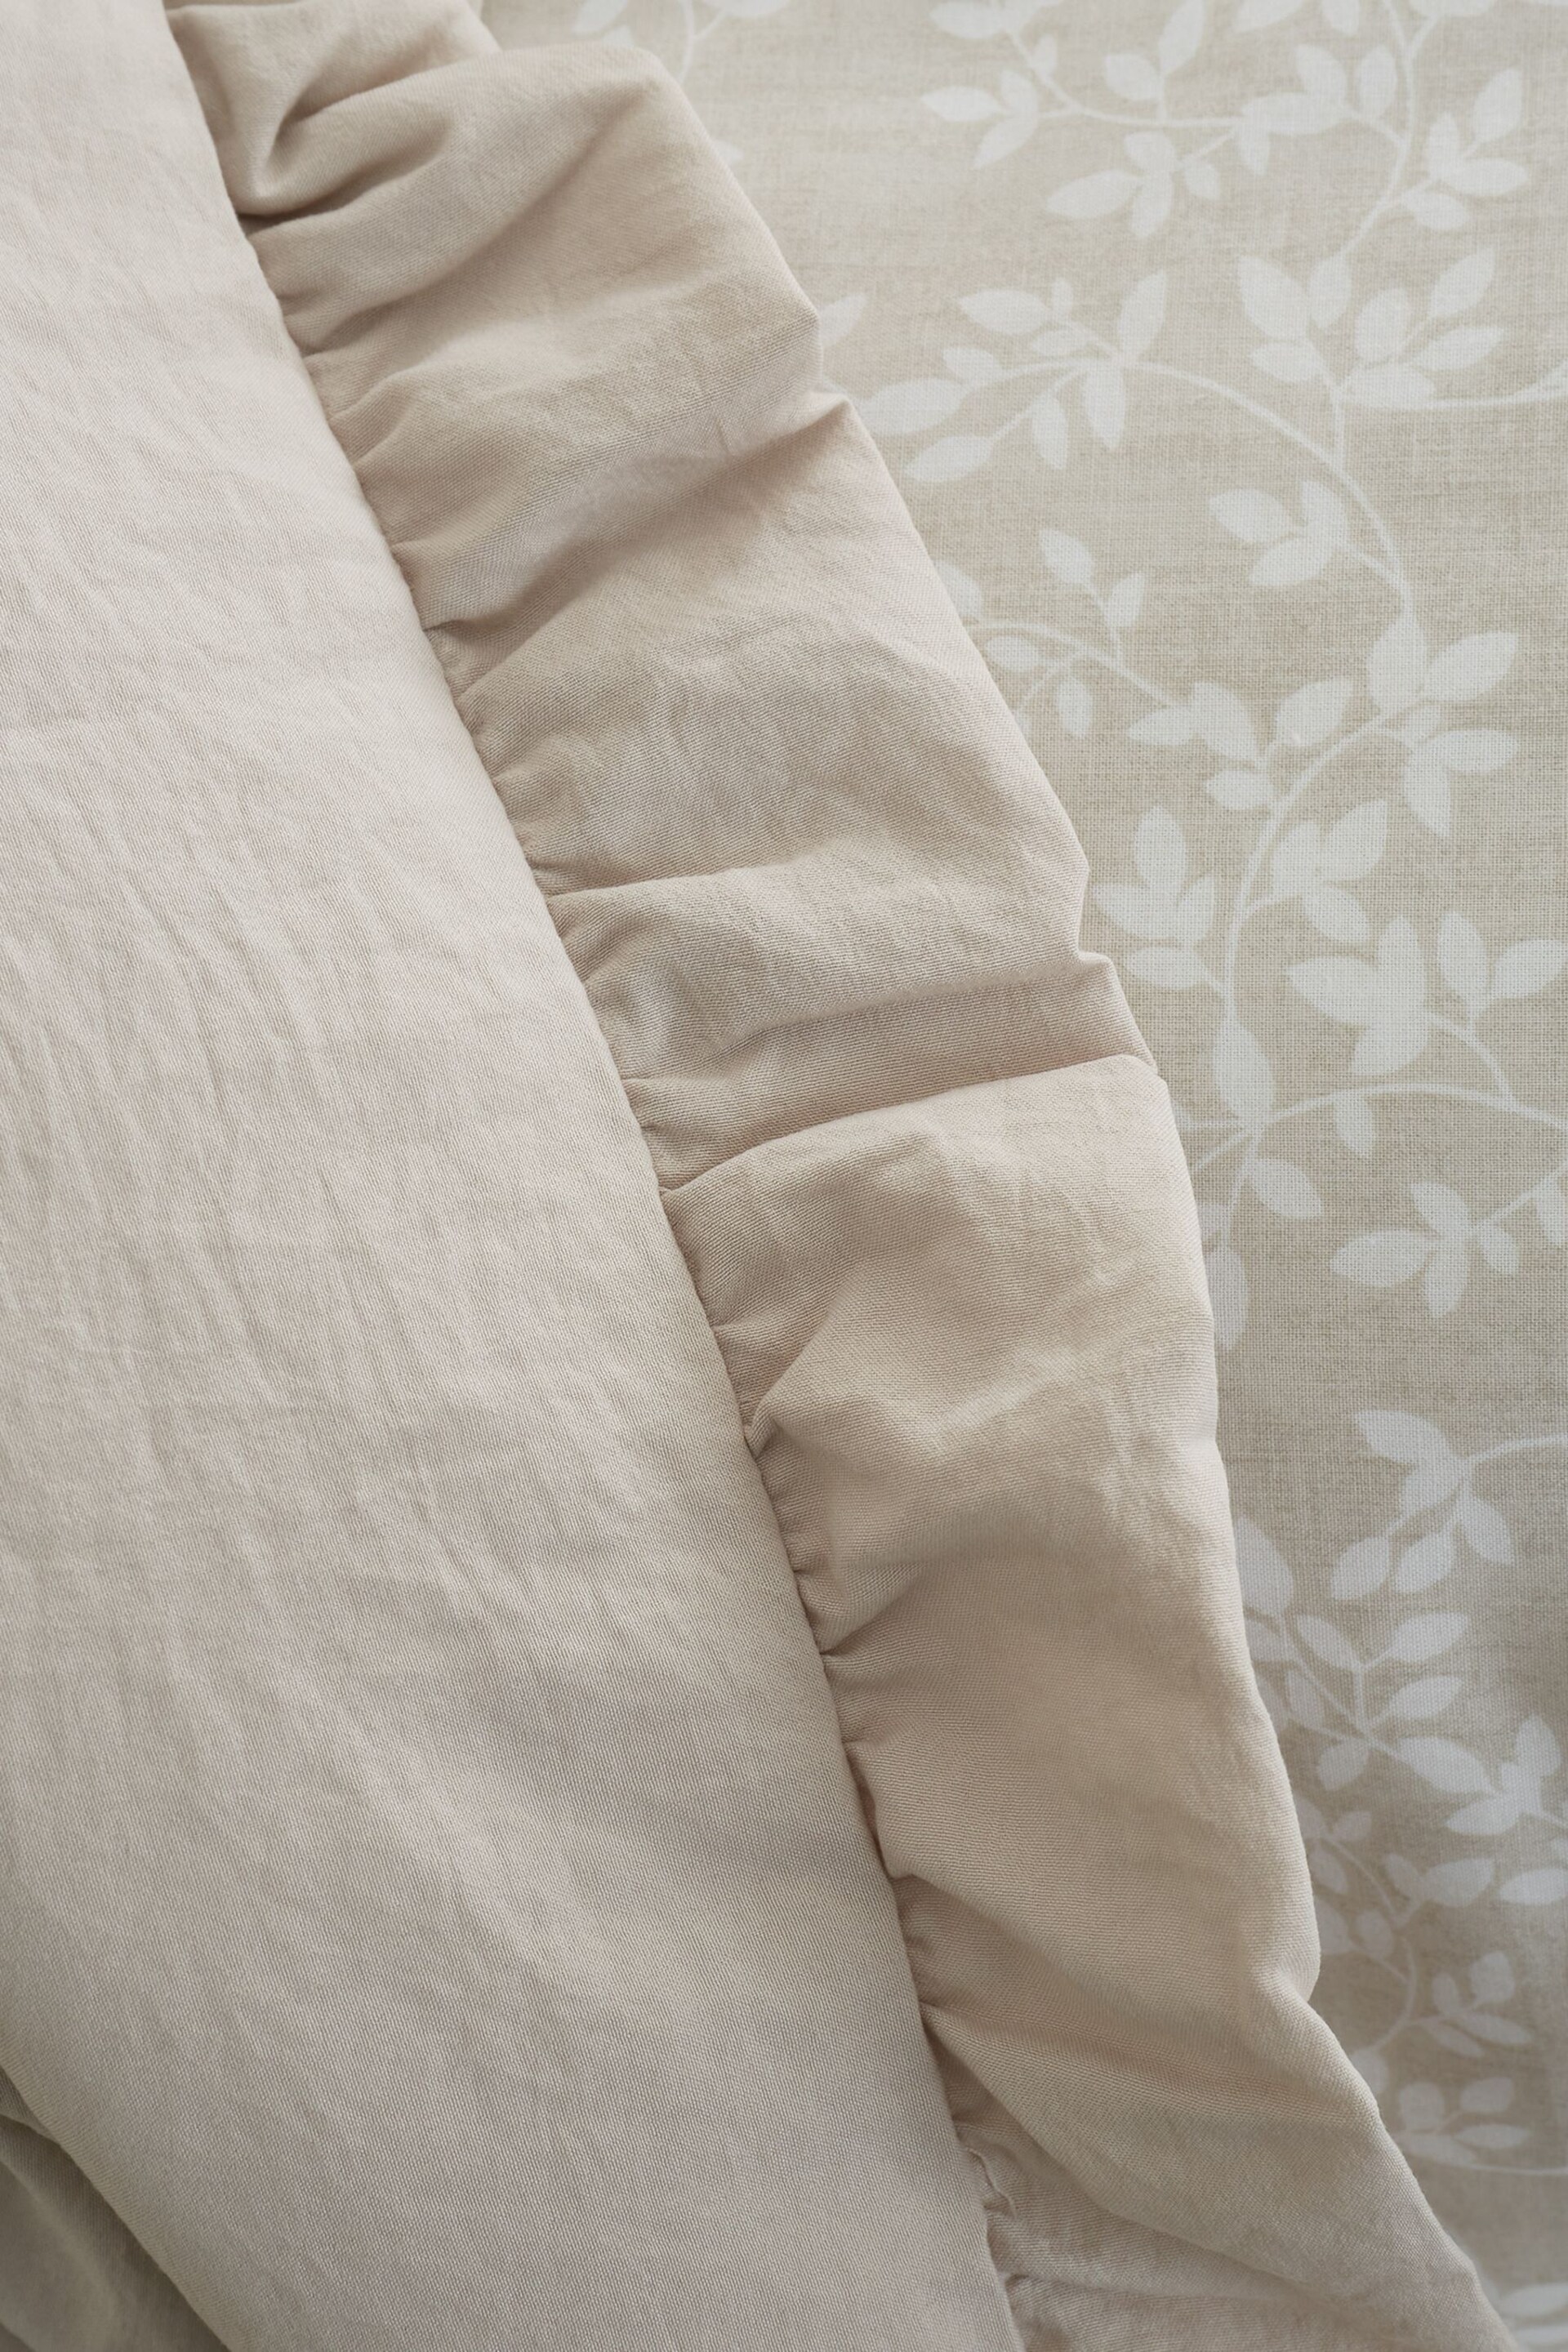 Bianca Natural Soft Washed Frill 220x230cm Bedspread - Image 2 of 3